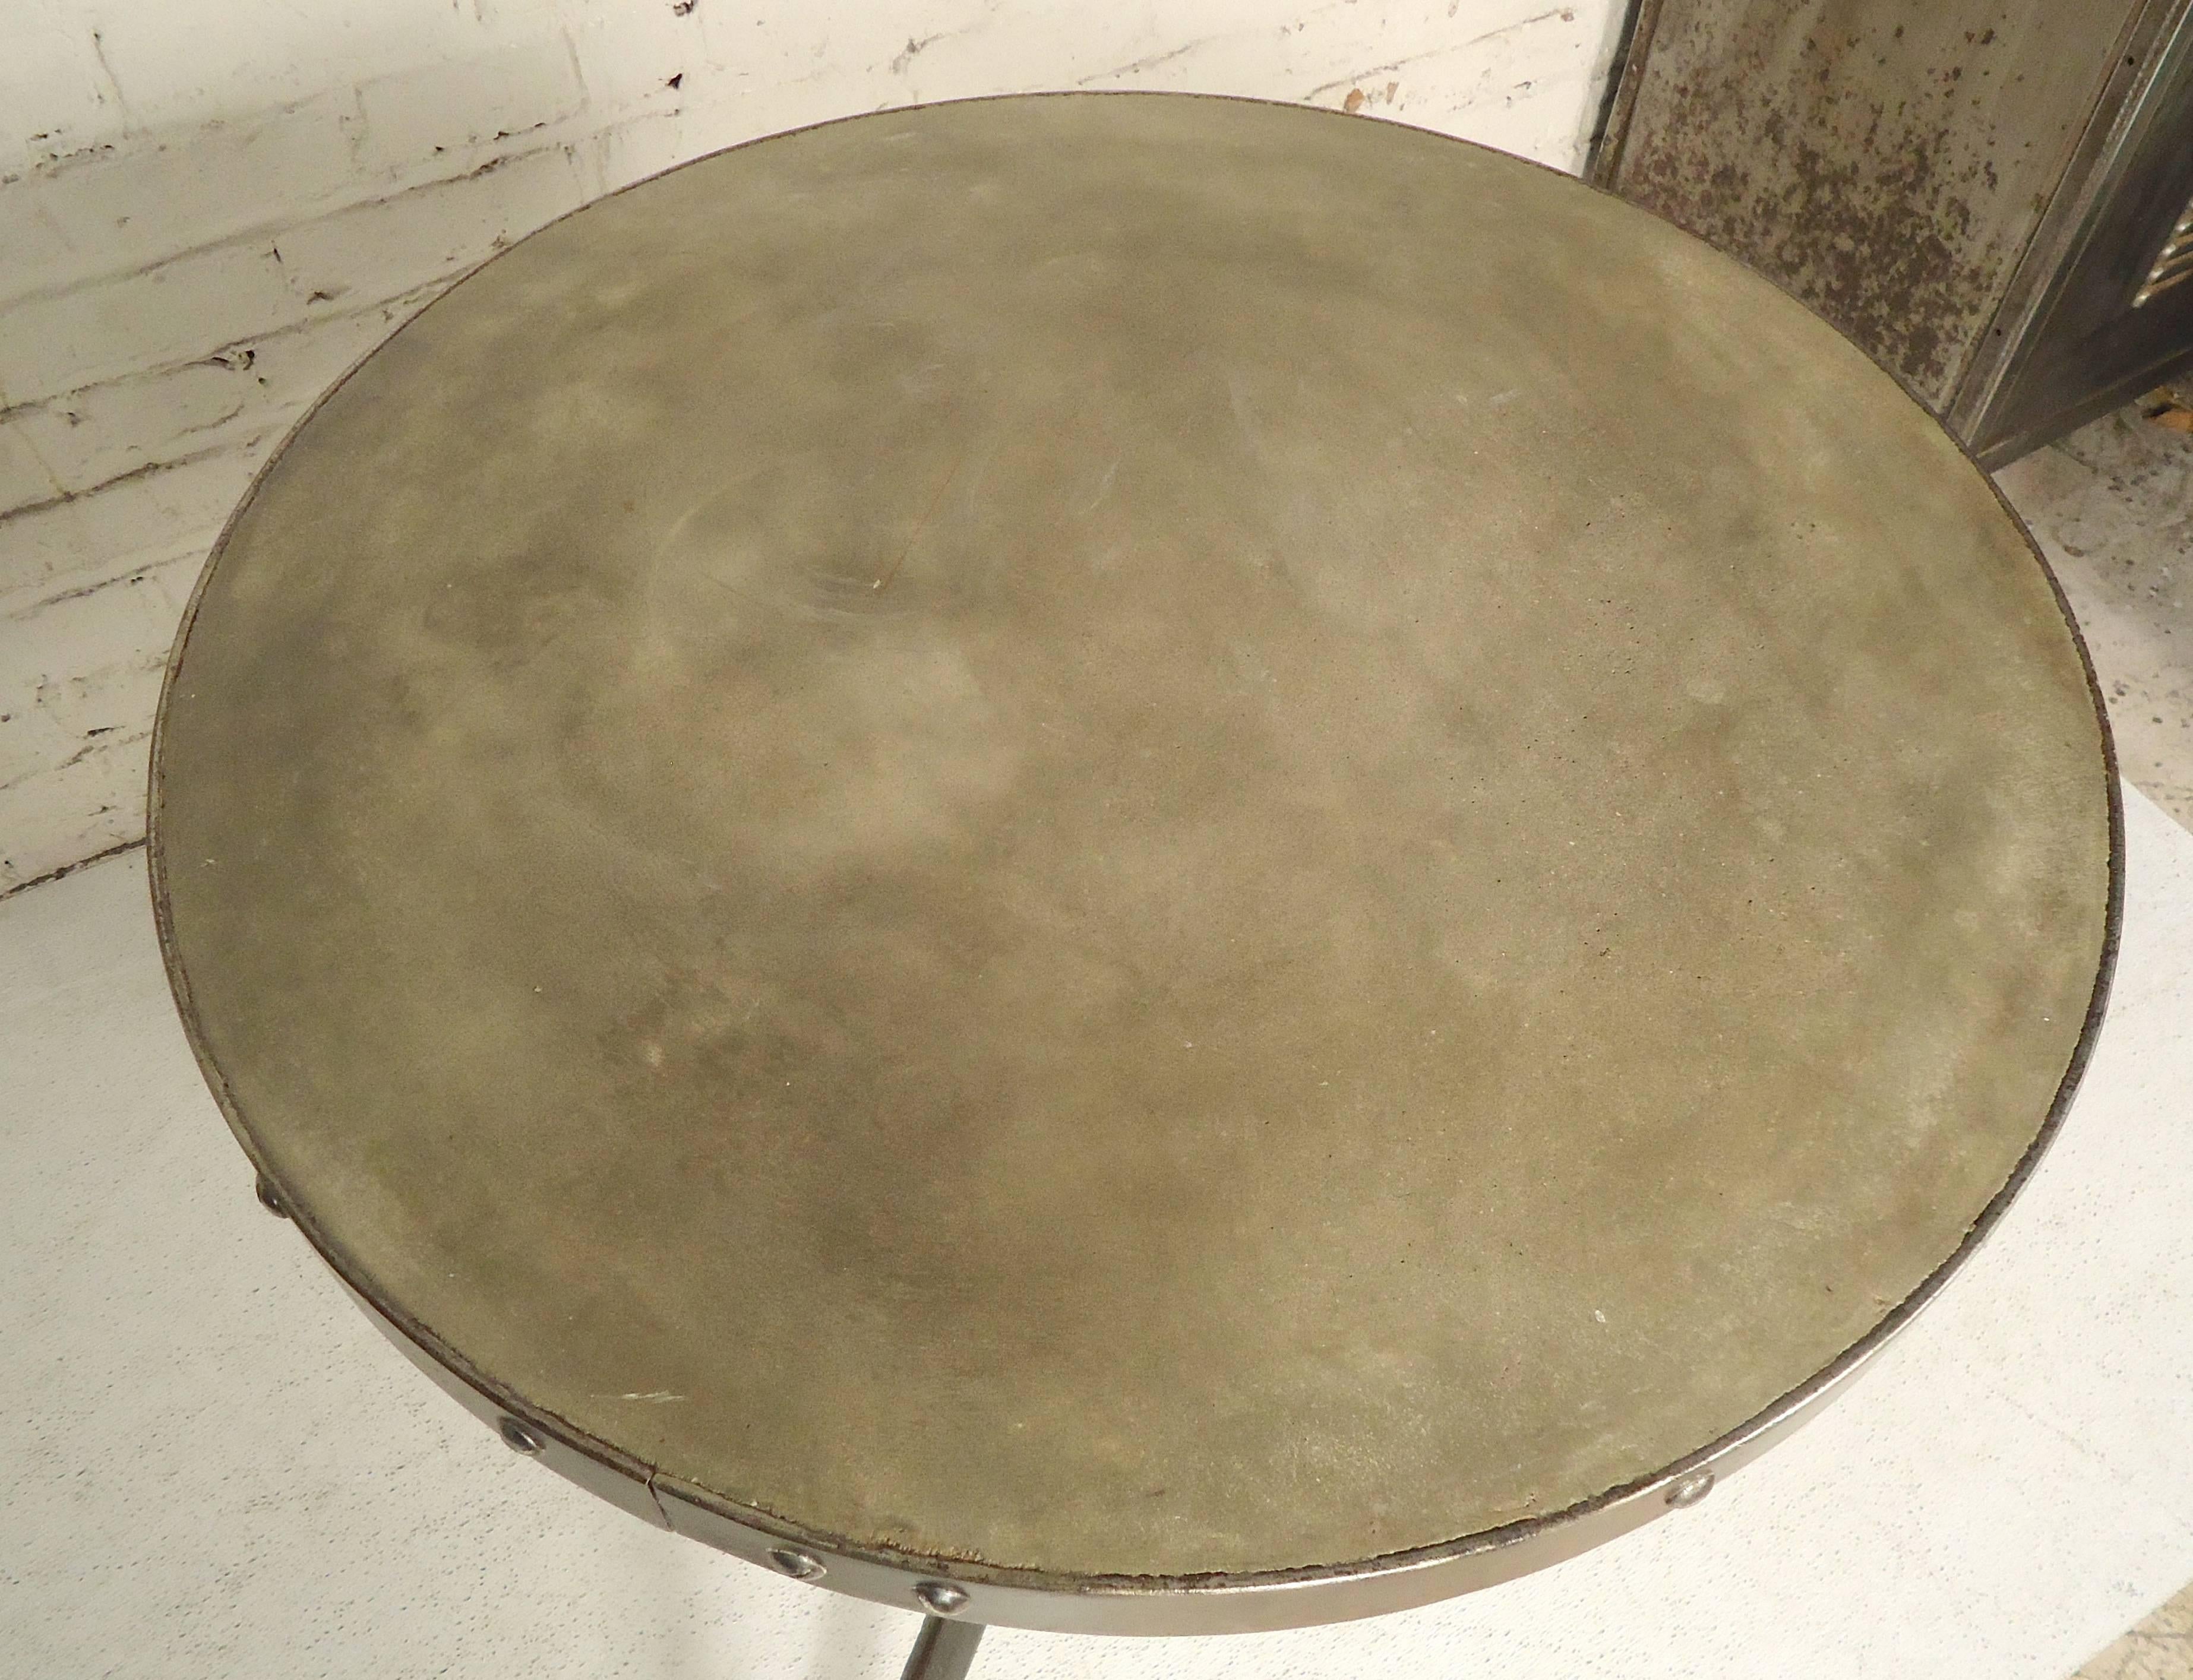 Small round patio table with concrete top and heavy metal frame. Frame has been refinished to a bare metal style finish.

(Please confirm item location - NY or NJ - with dealer).
 